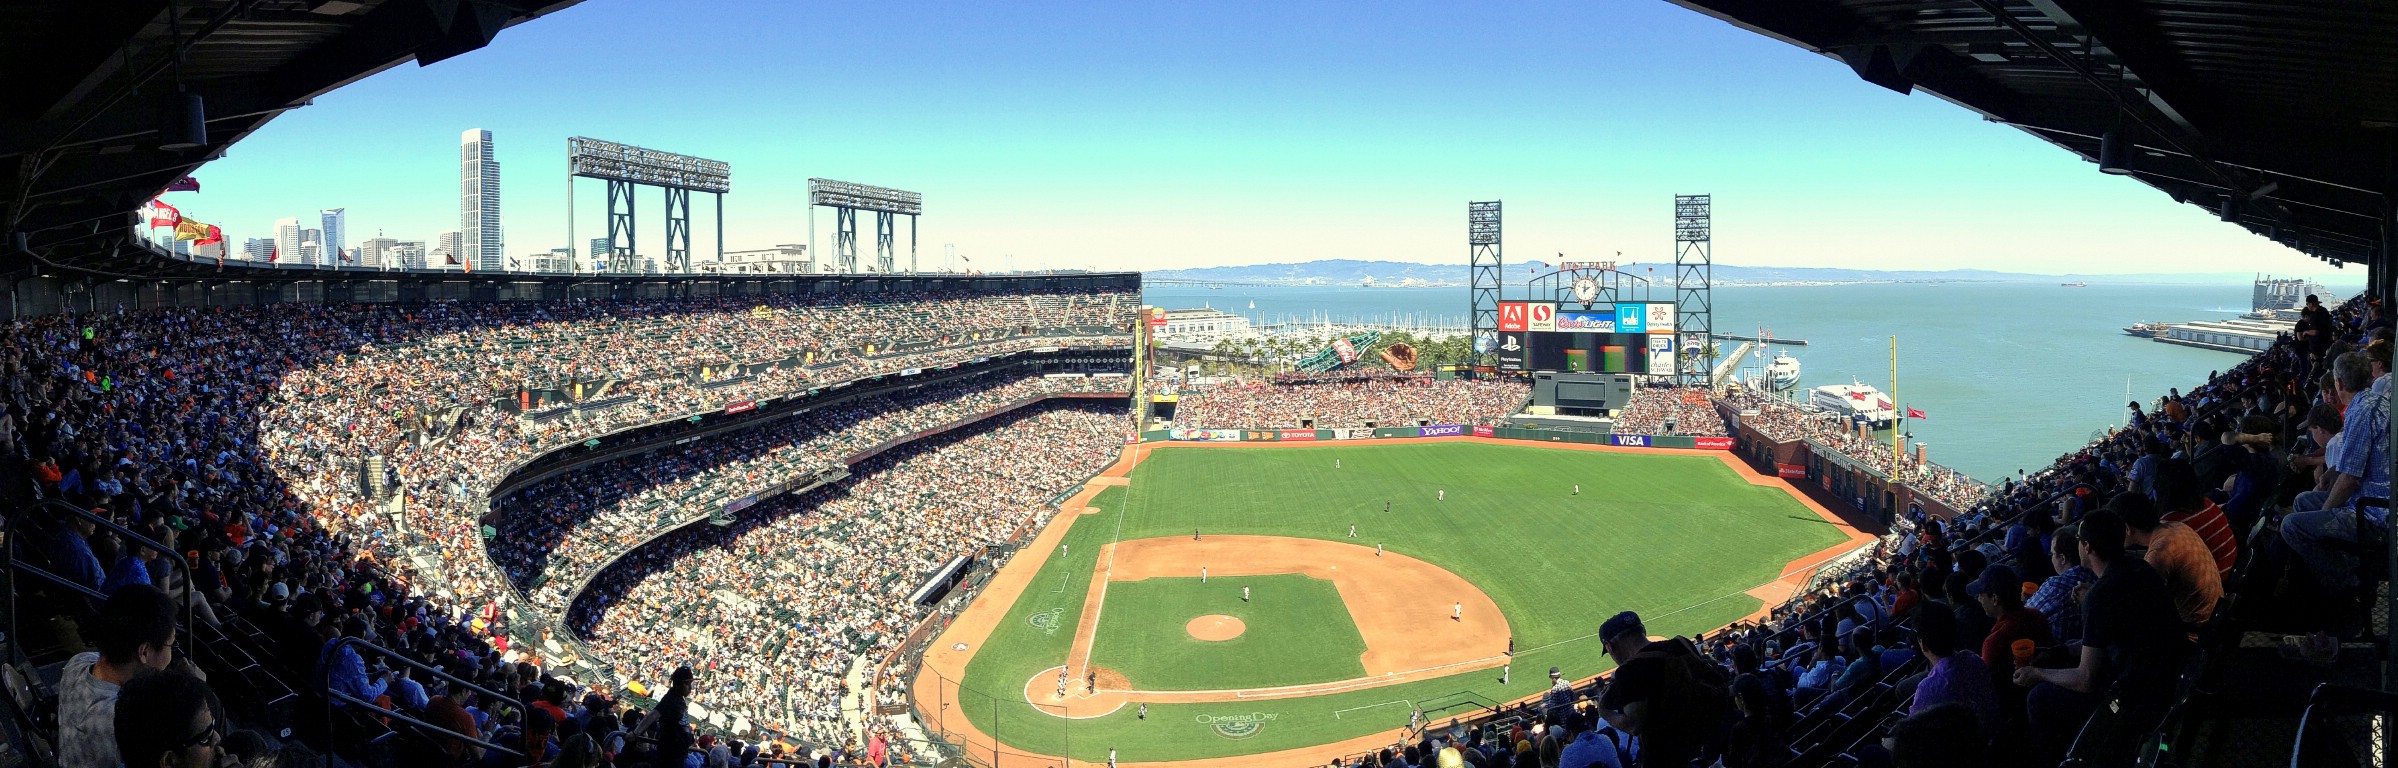 An iPod panorama from the inside of AT&T Park, home of the San Francisco Giants. San Francisco, California, USA. April 10th 2013.